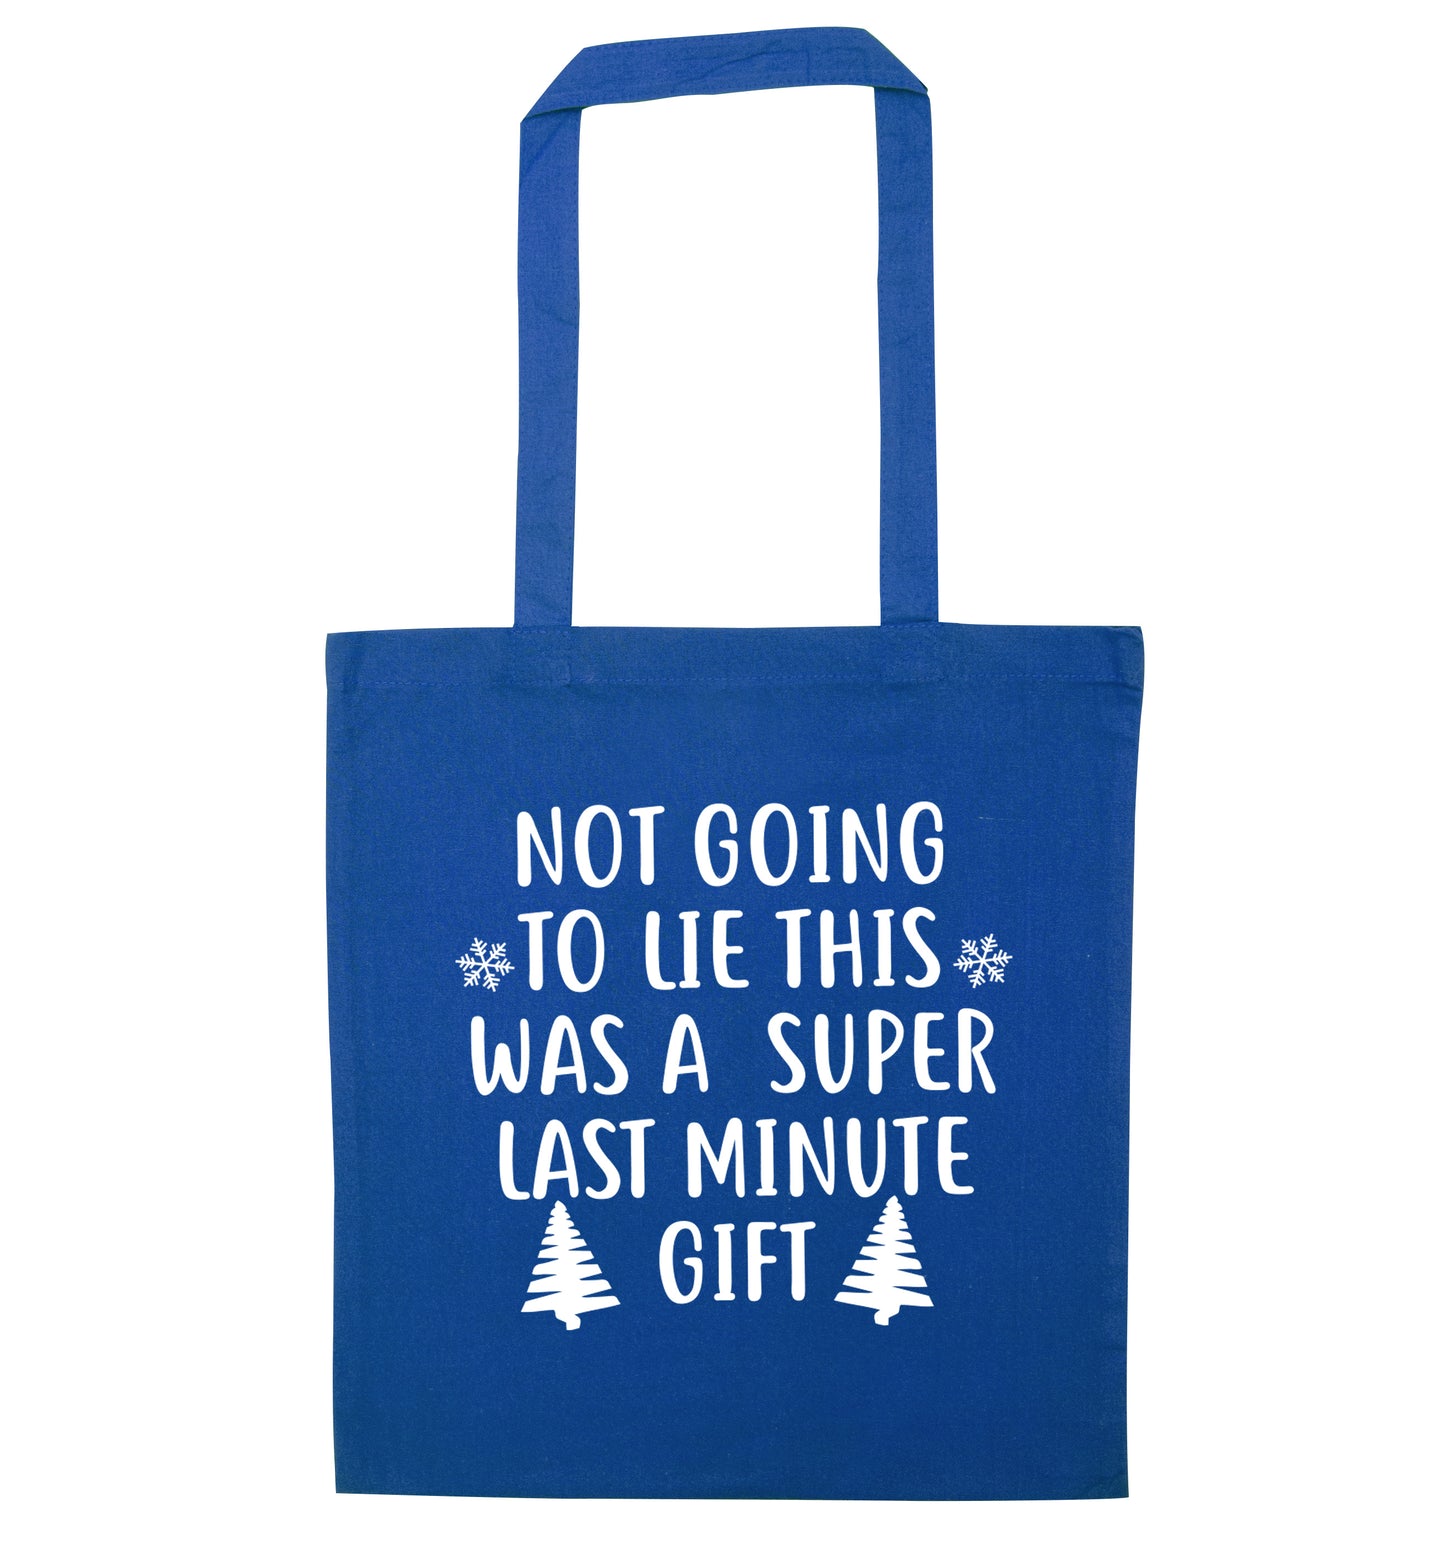 Not going to lie this was a super last minute gift blue tote bag